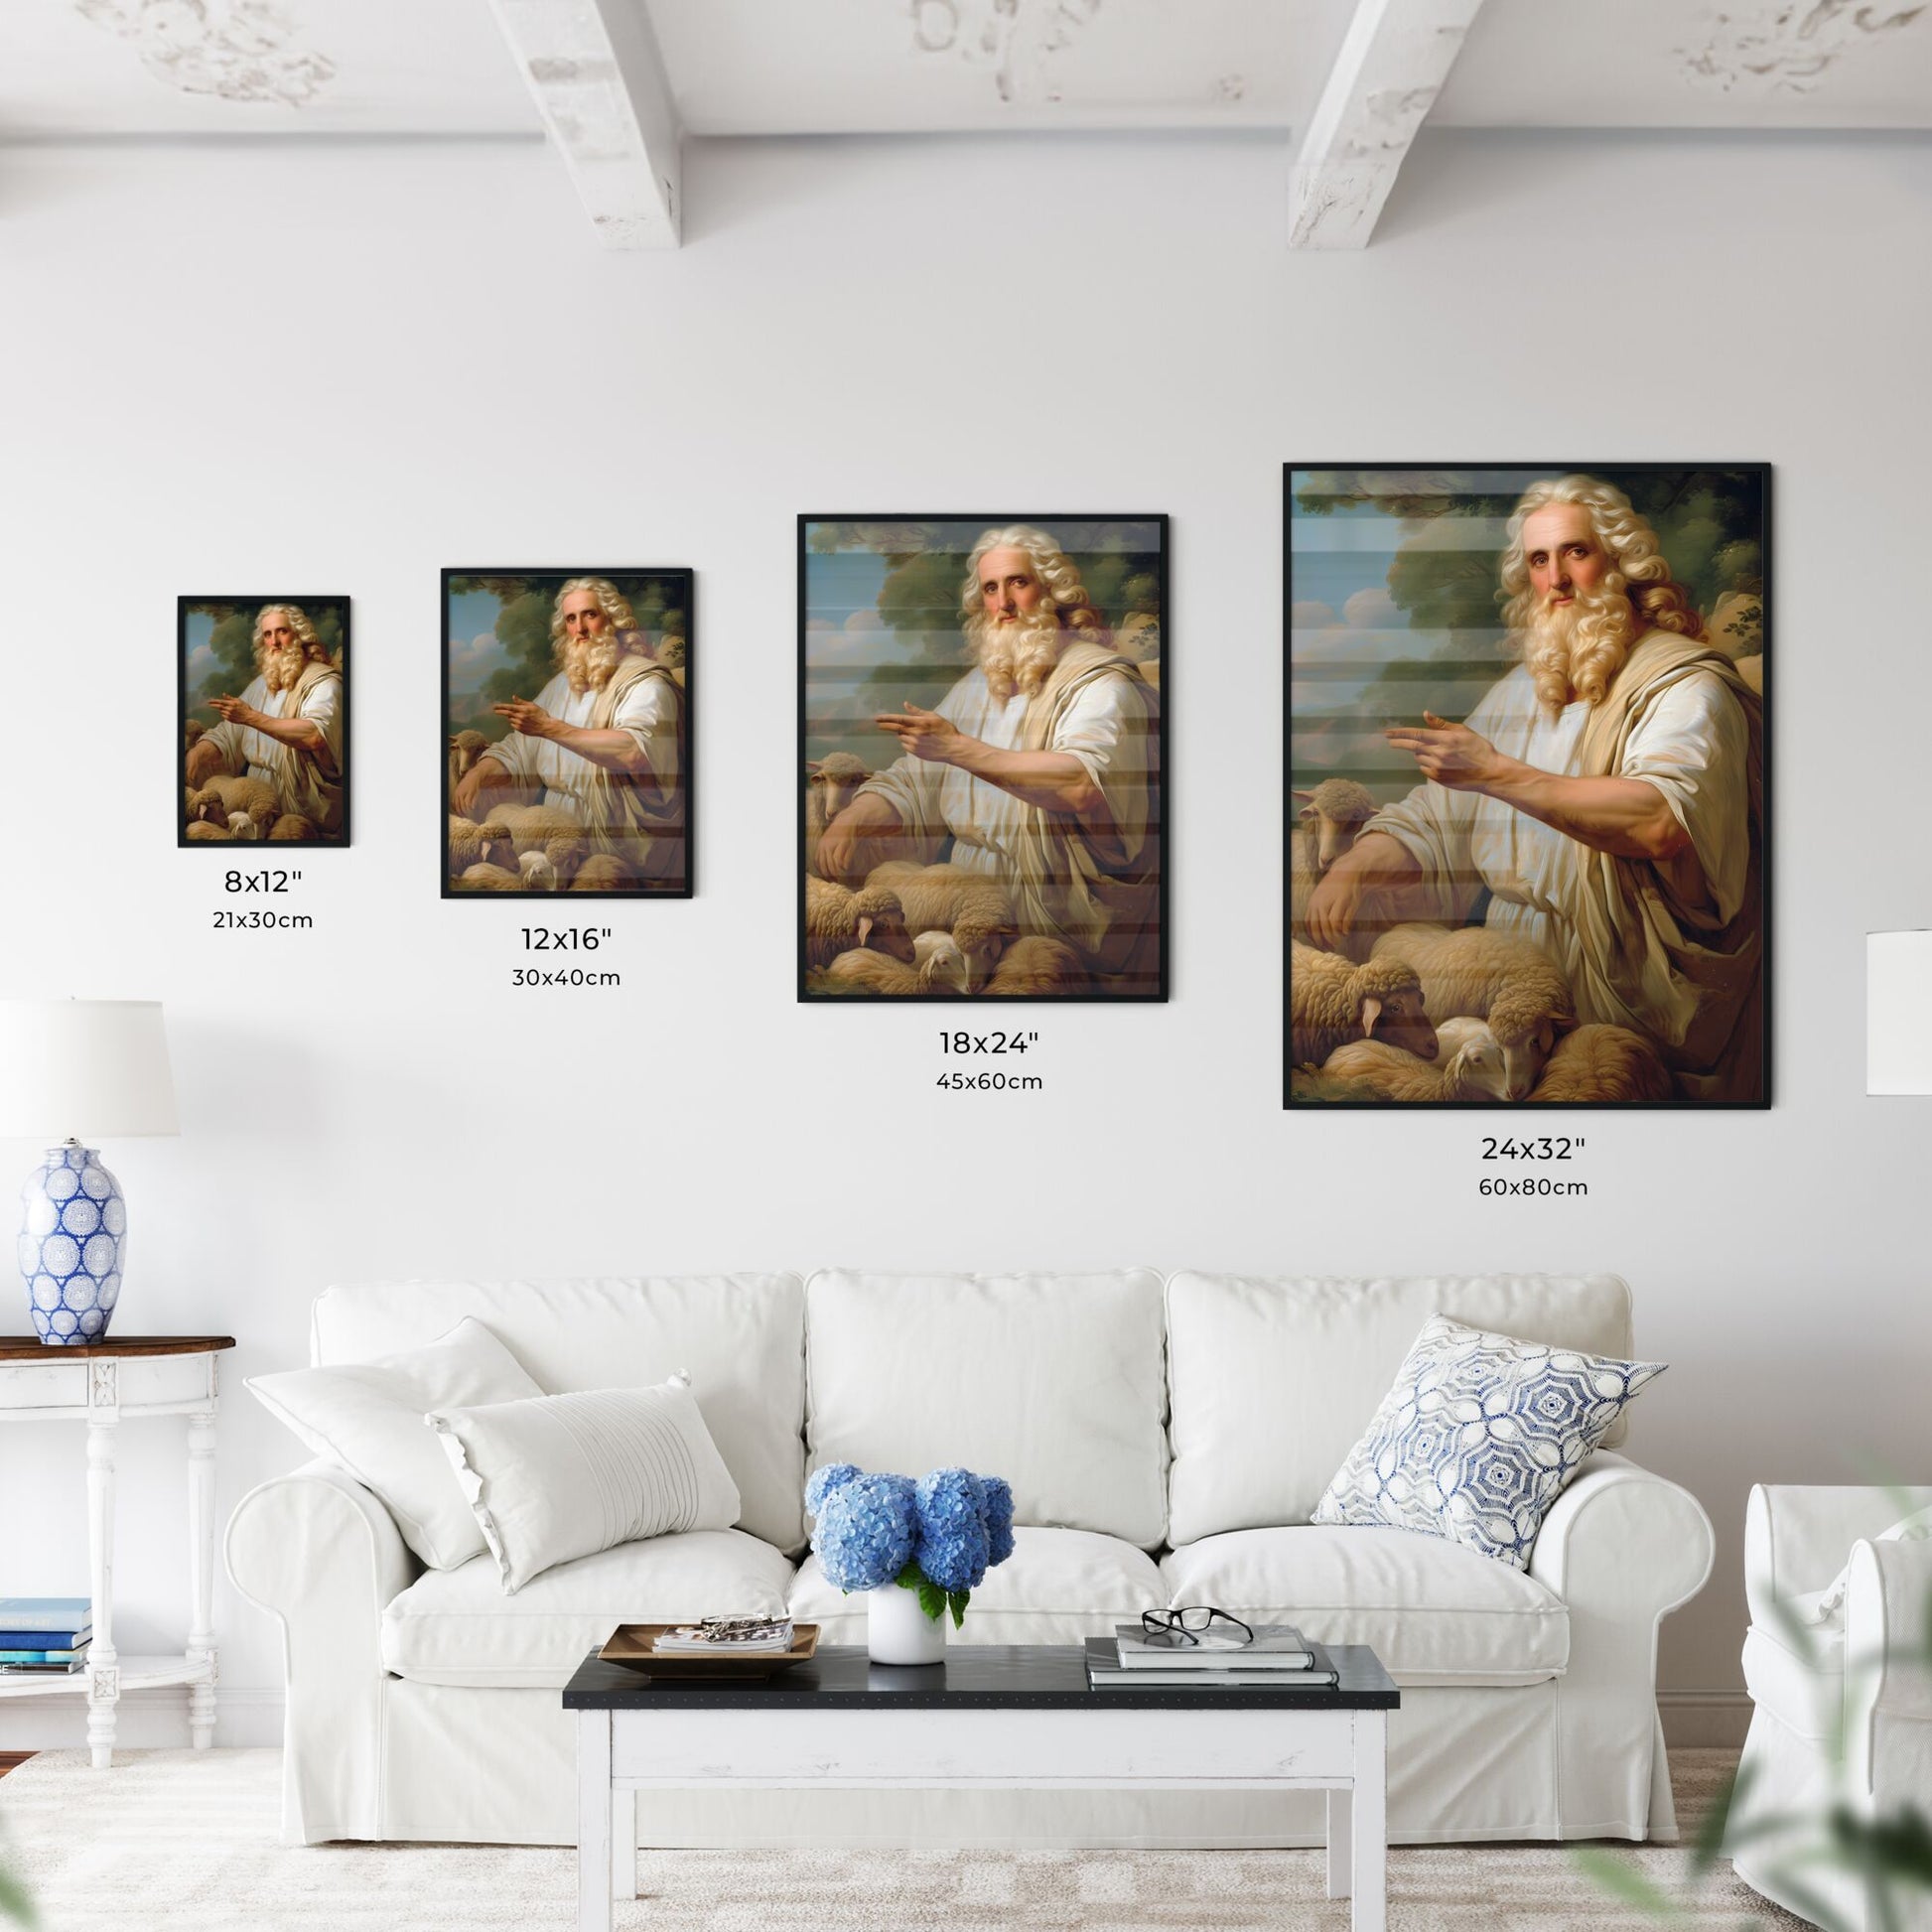 Moses prophet of God herding the flock in the desert, looking up at the sky - Art print of a painting of a man with a beard and sheep Default Title